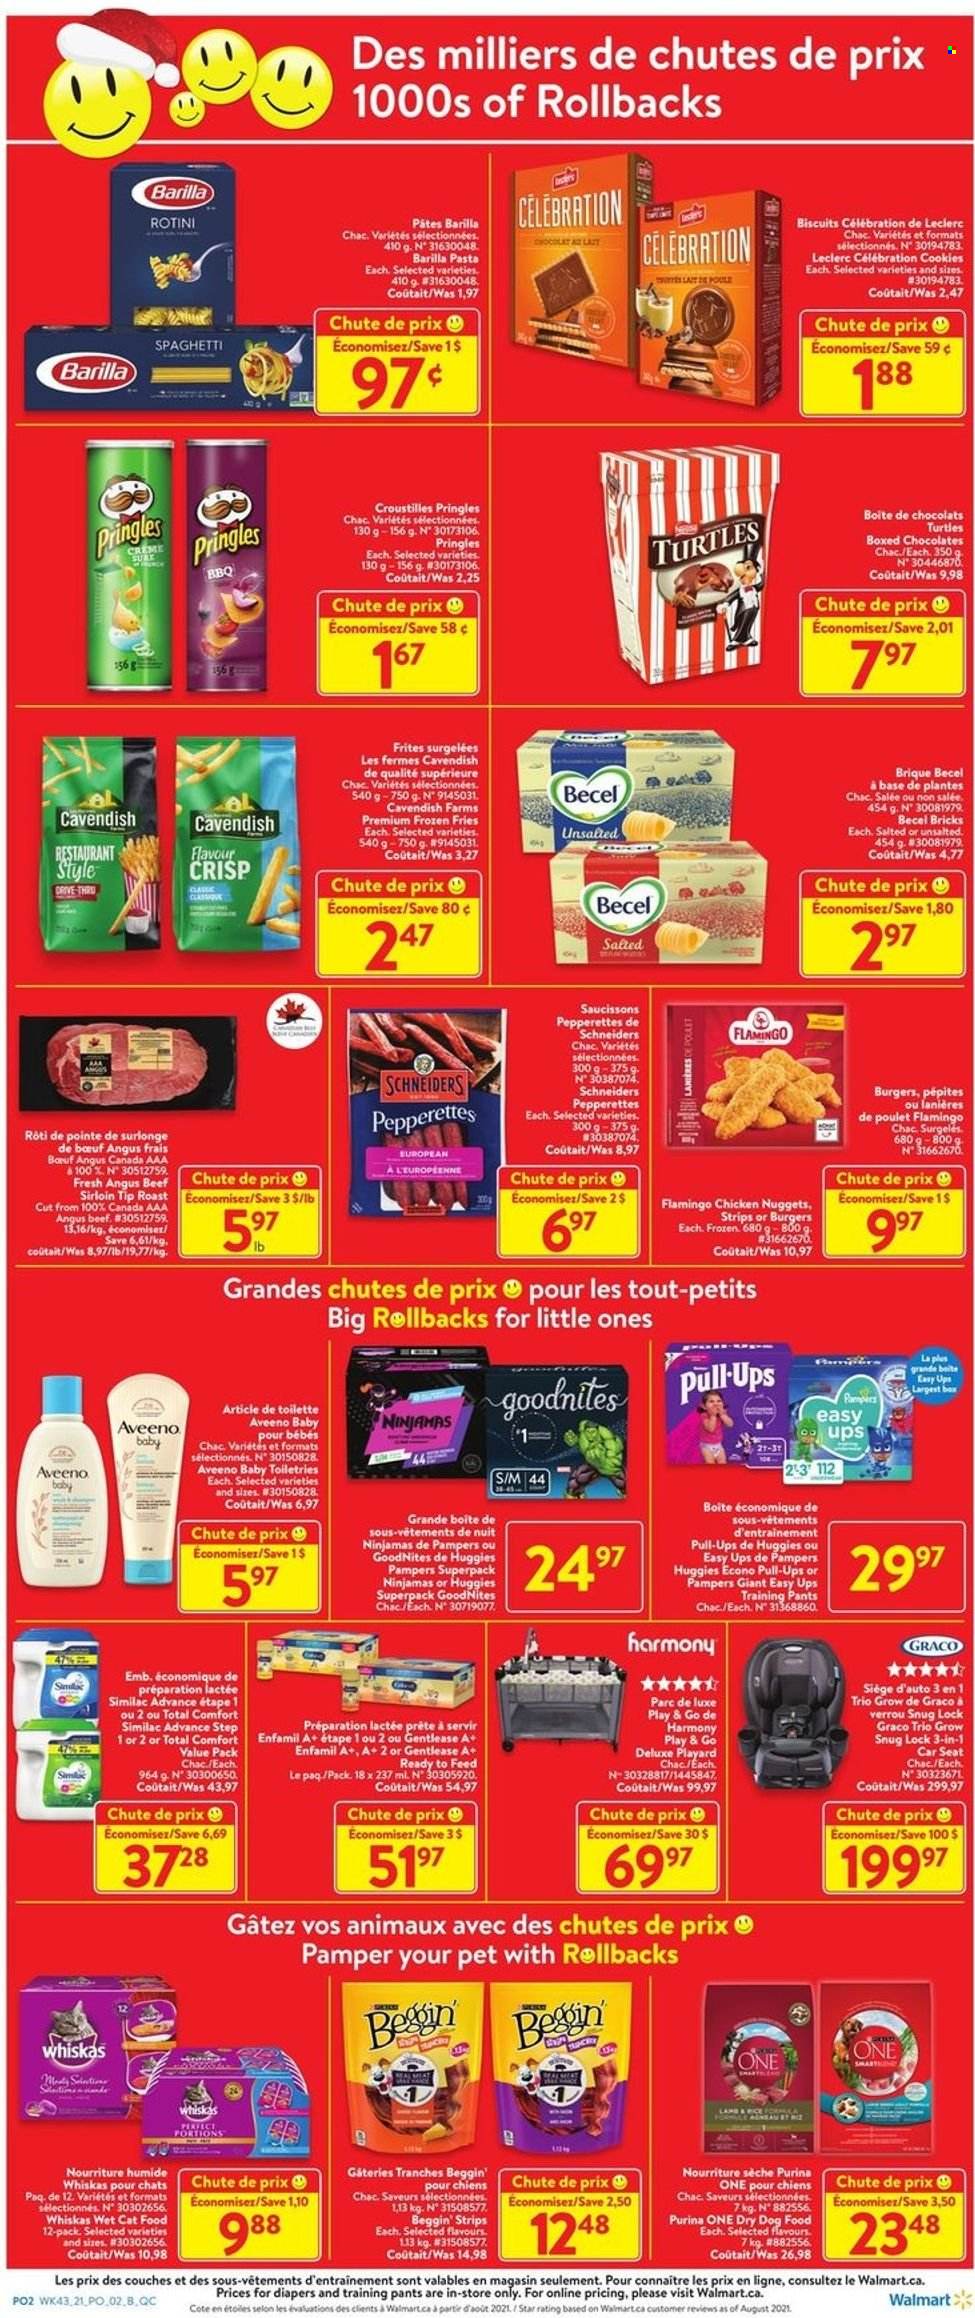 thumbnail - Walmart Flyer - November 18, 2021 - November 24, 2021 - Sales products - spaghetti, pasta, chicken nuggets, Barilla, strips, potato fries, cookies, chocolate, Celebration, biscuit, Pringles, Enfamil, Similac, beef meat, beef sirloin, pants, nappies, baby pants, Aveeno, Sure, turtles, animal food, cat food, dog food, Purina, dry dog food, Beggin', wet cat food, Snug, baby car seat, Huggies, Pampers, Whiskas. Page 2.